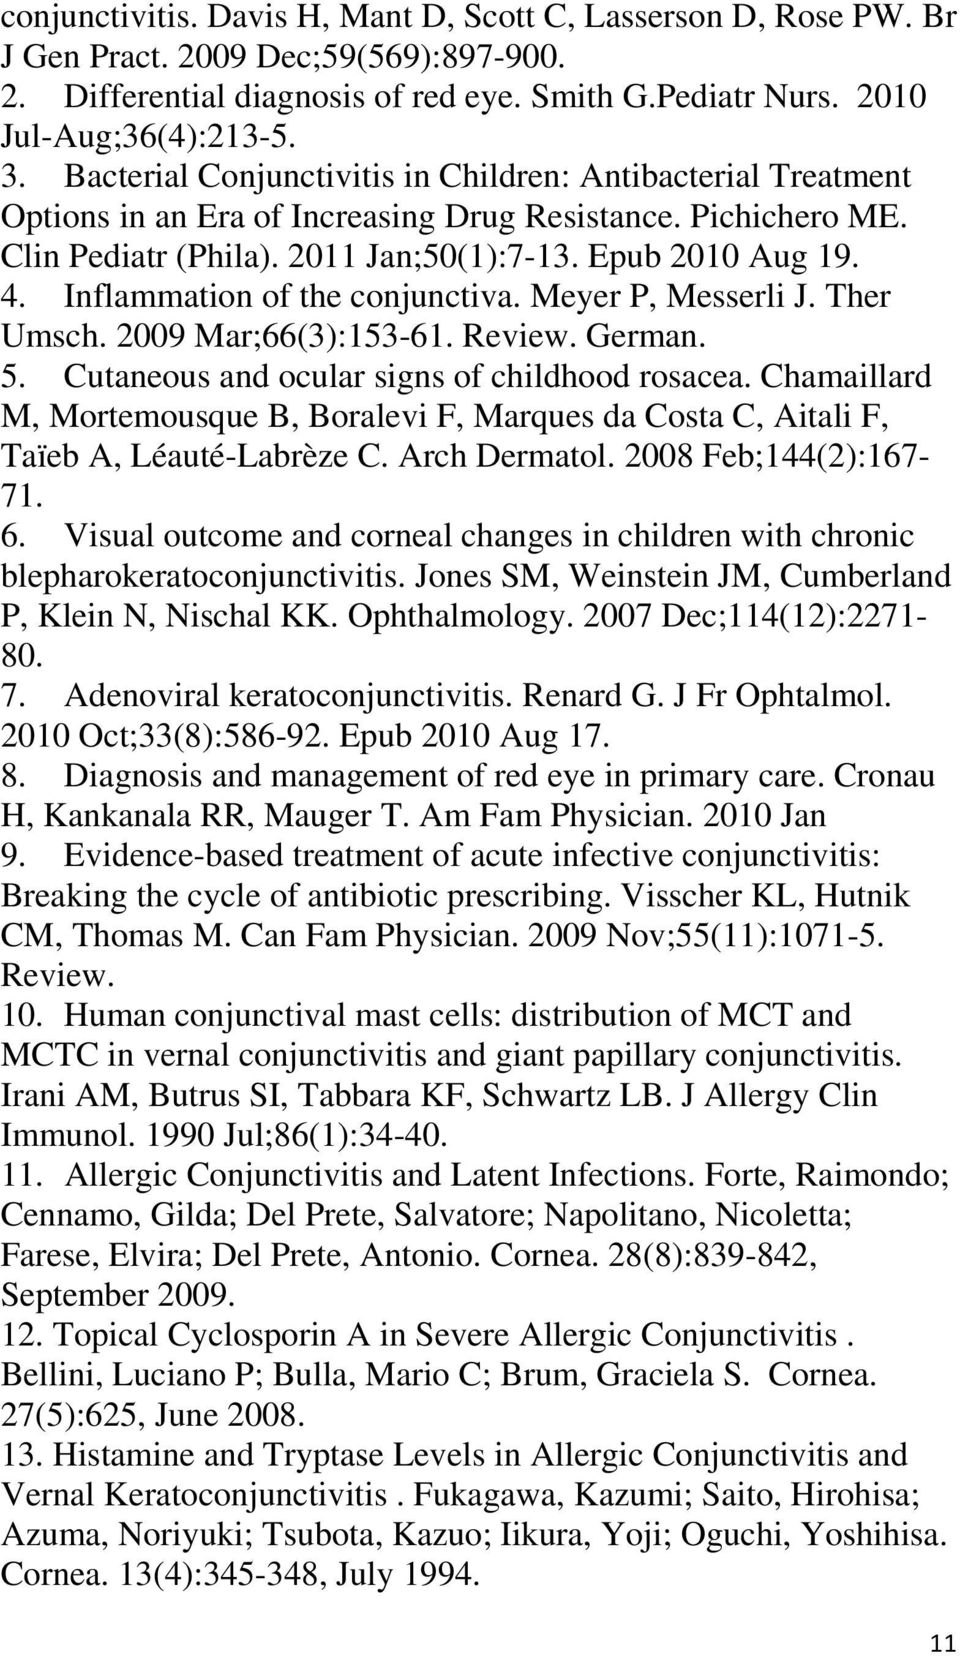 Inflammation of the conjunctiva. Meyer P, Messerli J. Ther Umsch. 2009 Mar;66(3):153-61. Review. German. 5. Cutaneous and ocular signs of childhood rosacea.